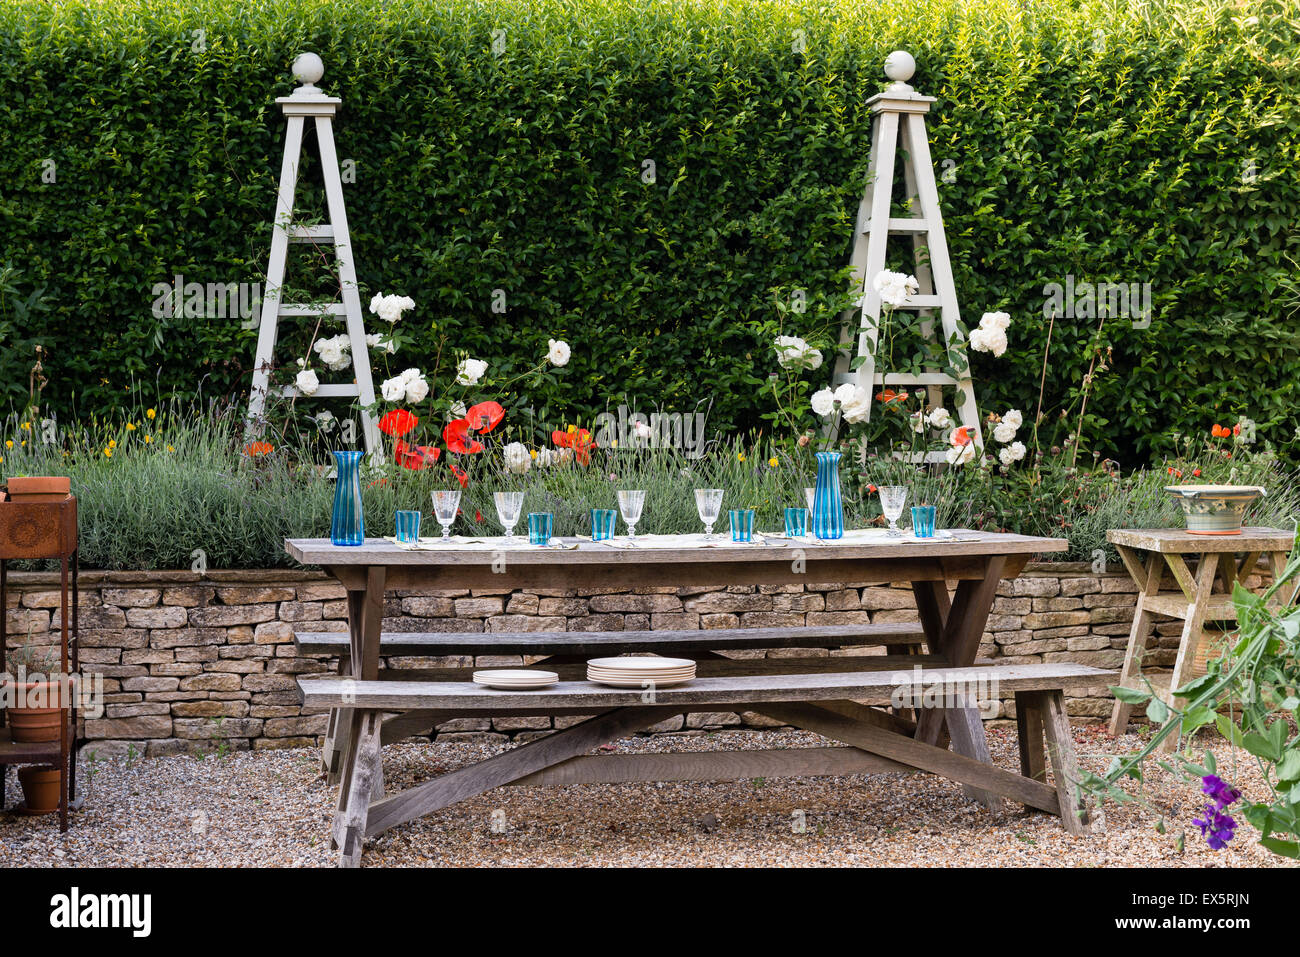 Picnic bench in garden with lavender bed and plant stands Stock Photo